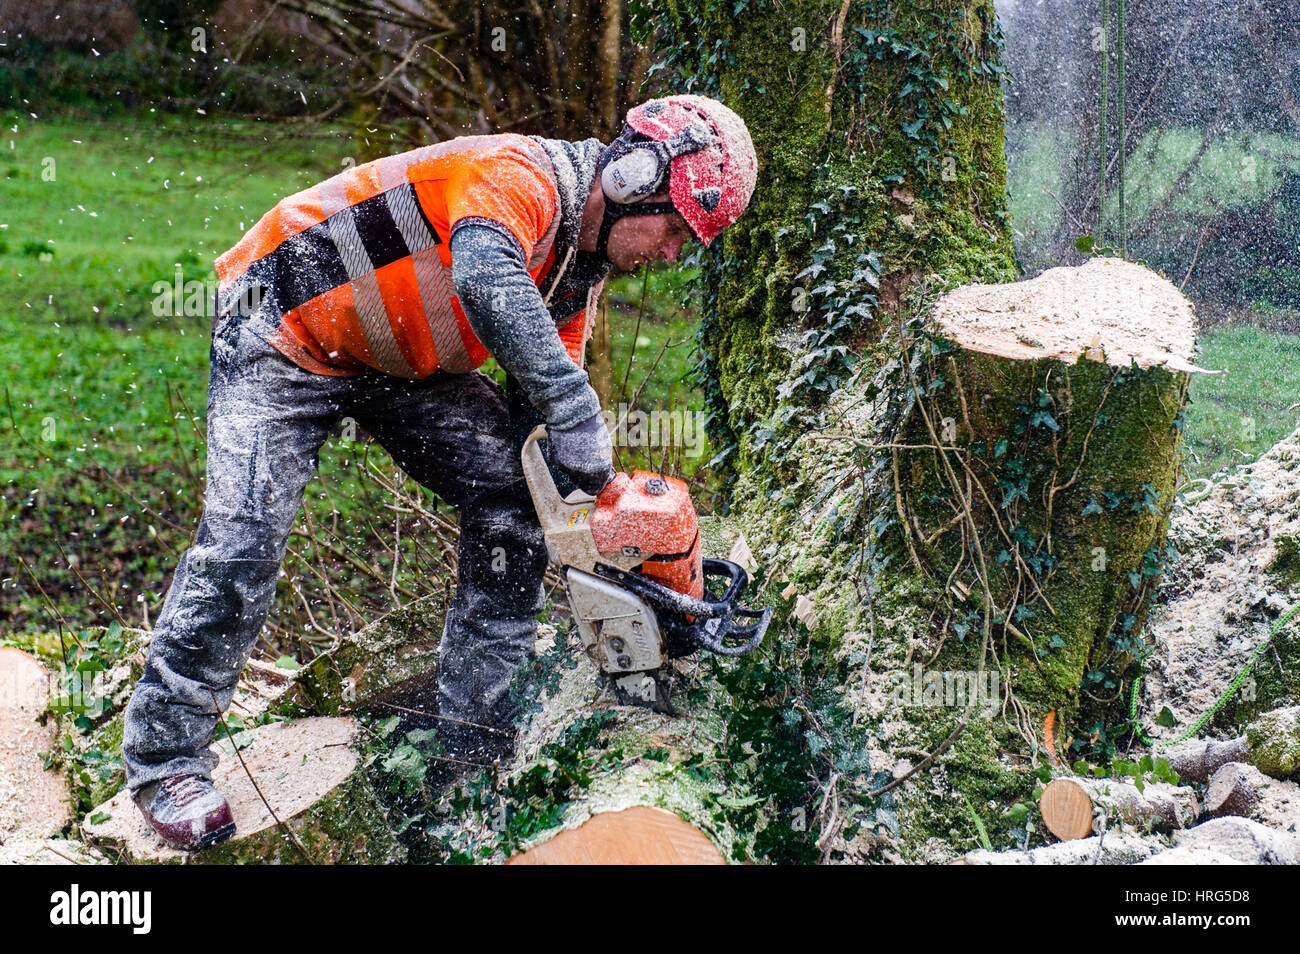 Professional Tree Surgeon cuts down a rotten tree in a domestic garden using a chainsaw in Ballydehob, West Cork, Ireland. Stock Photo